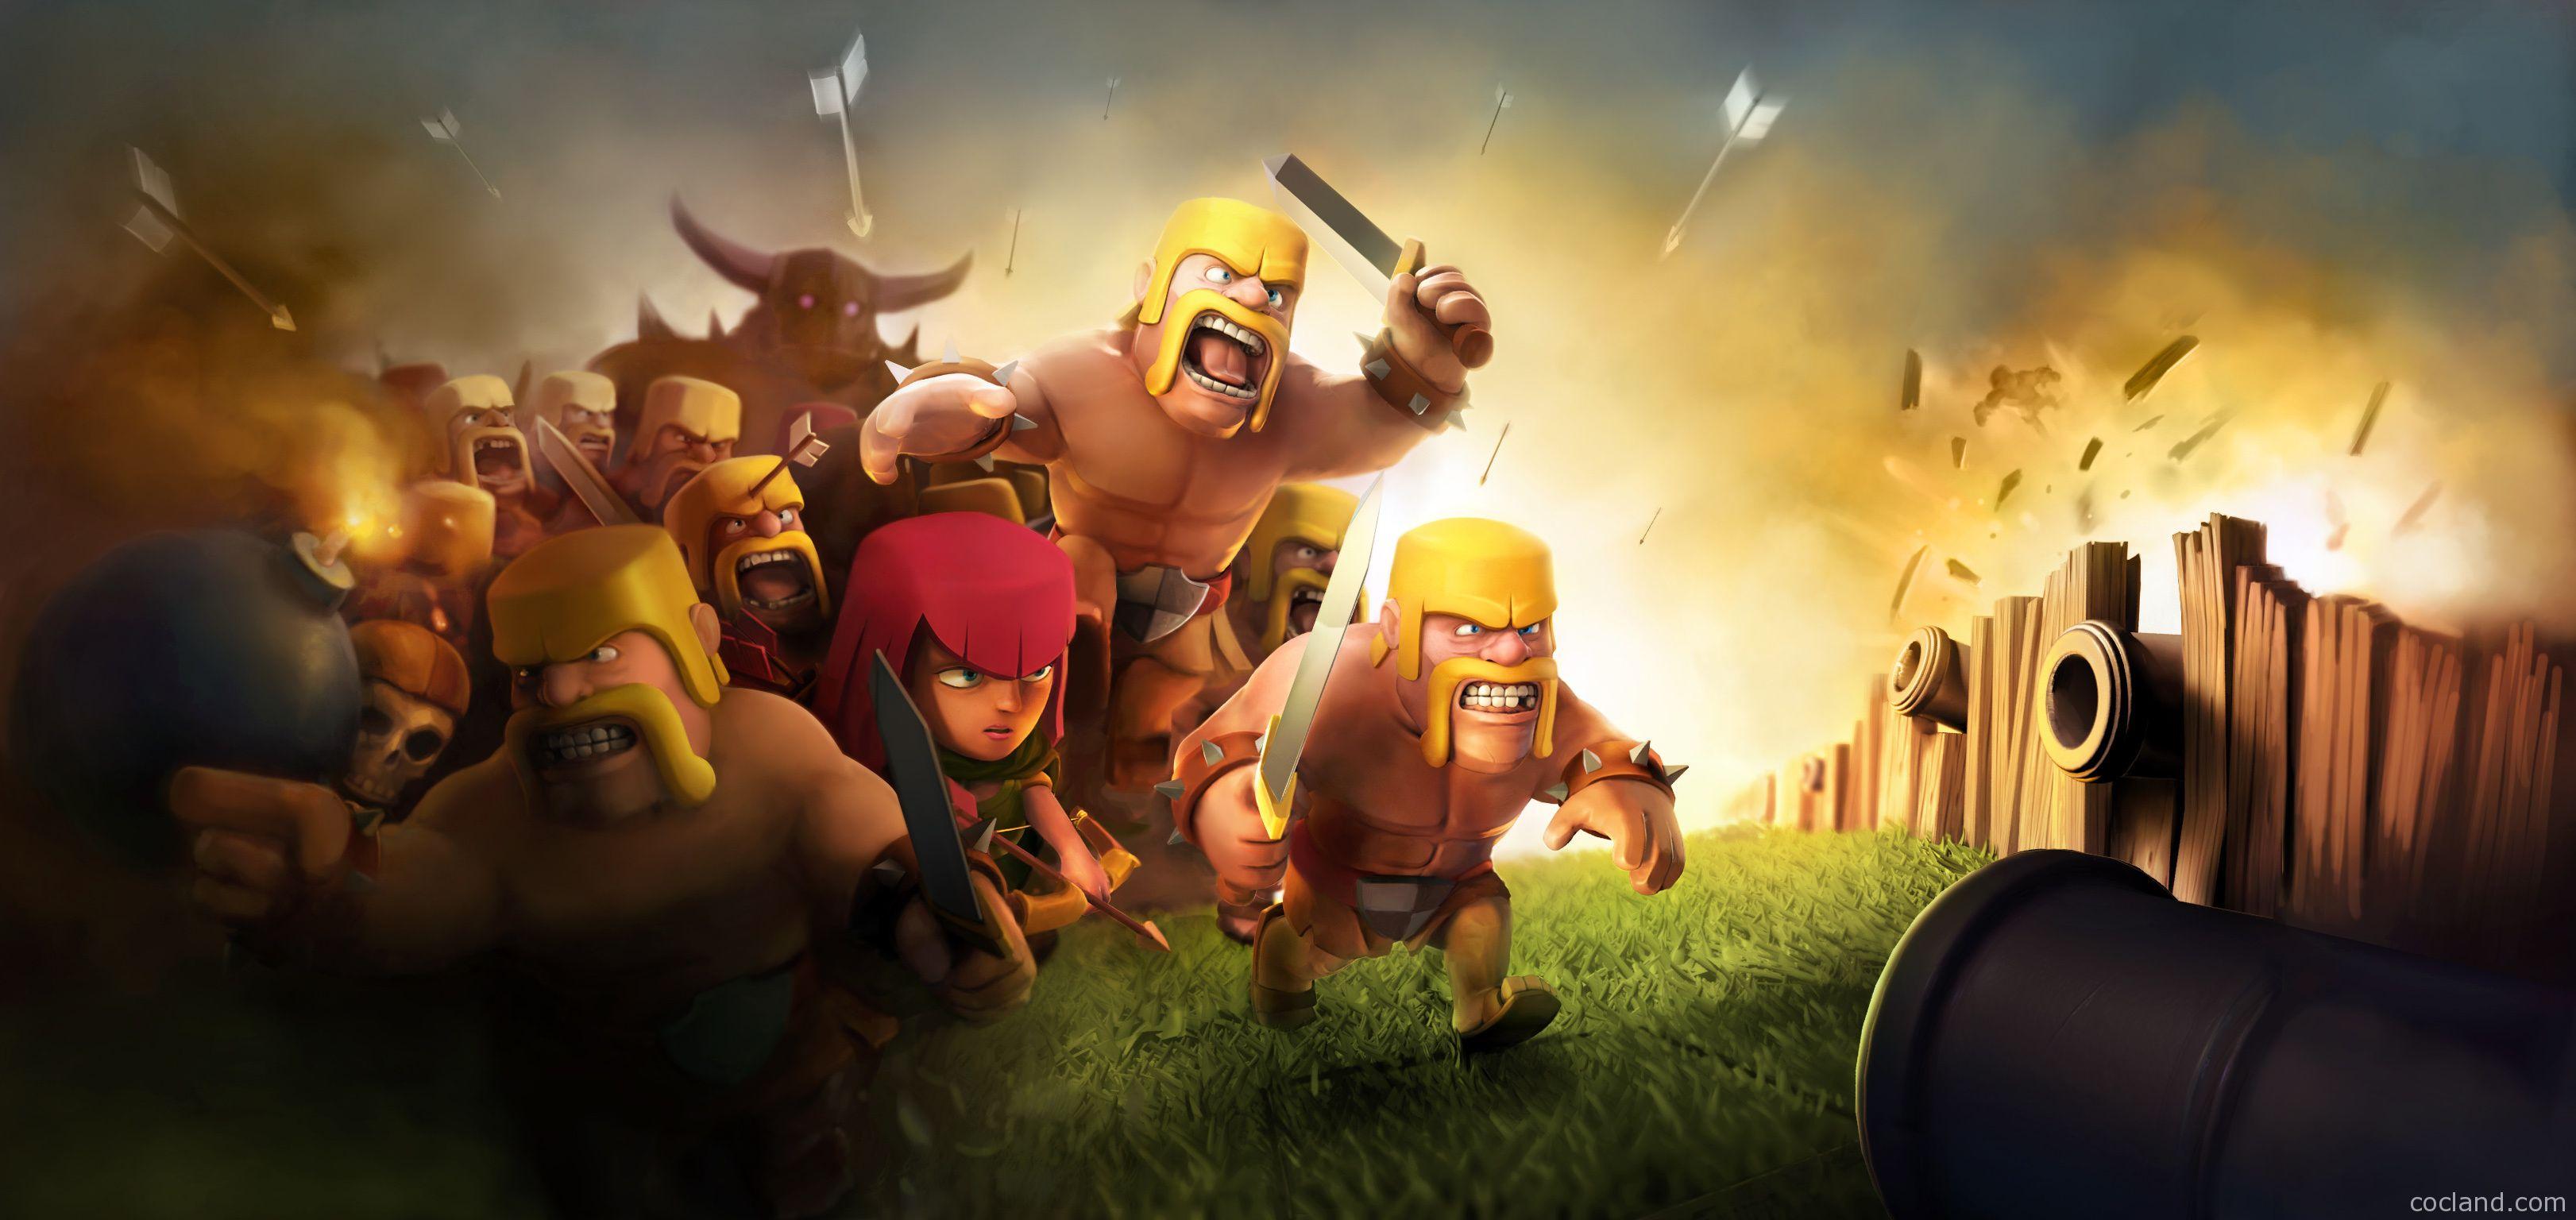 Clash of Clans Wallpaper › Heroes, Units, City Wallpaper and Artworks